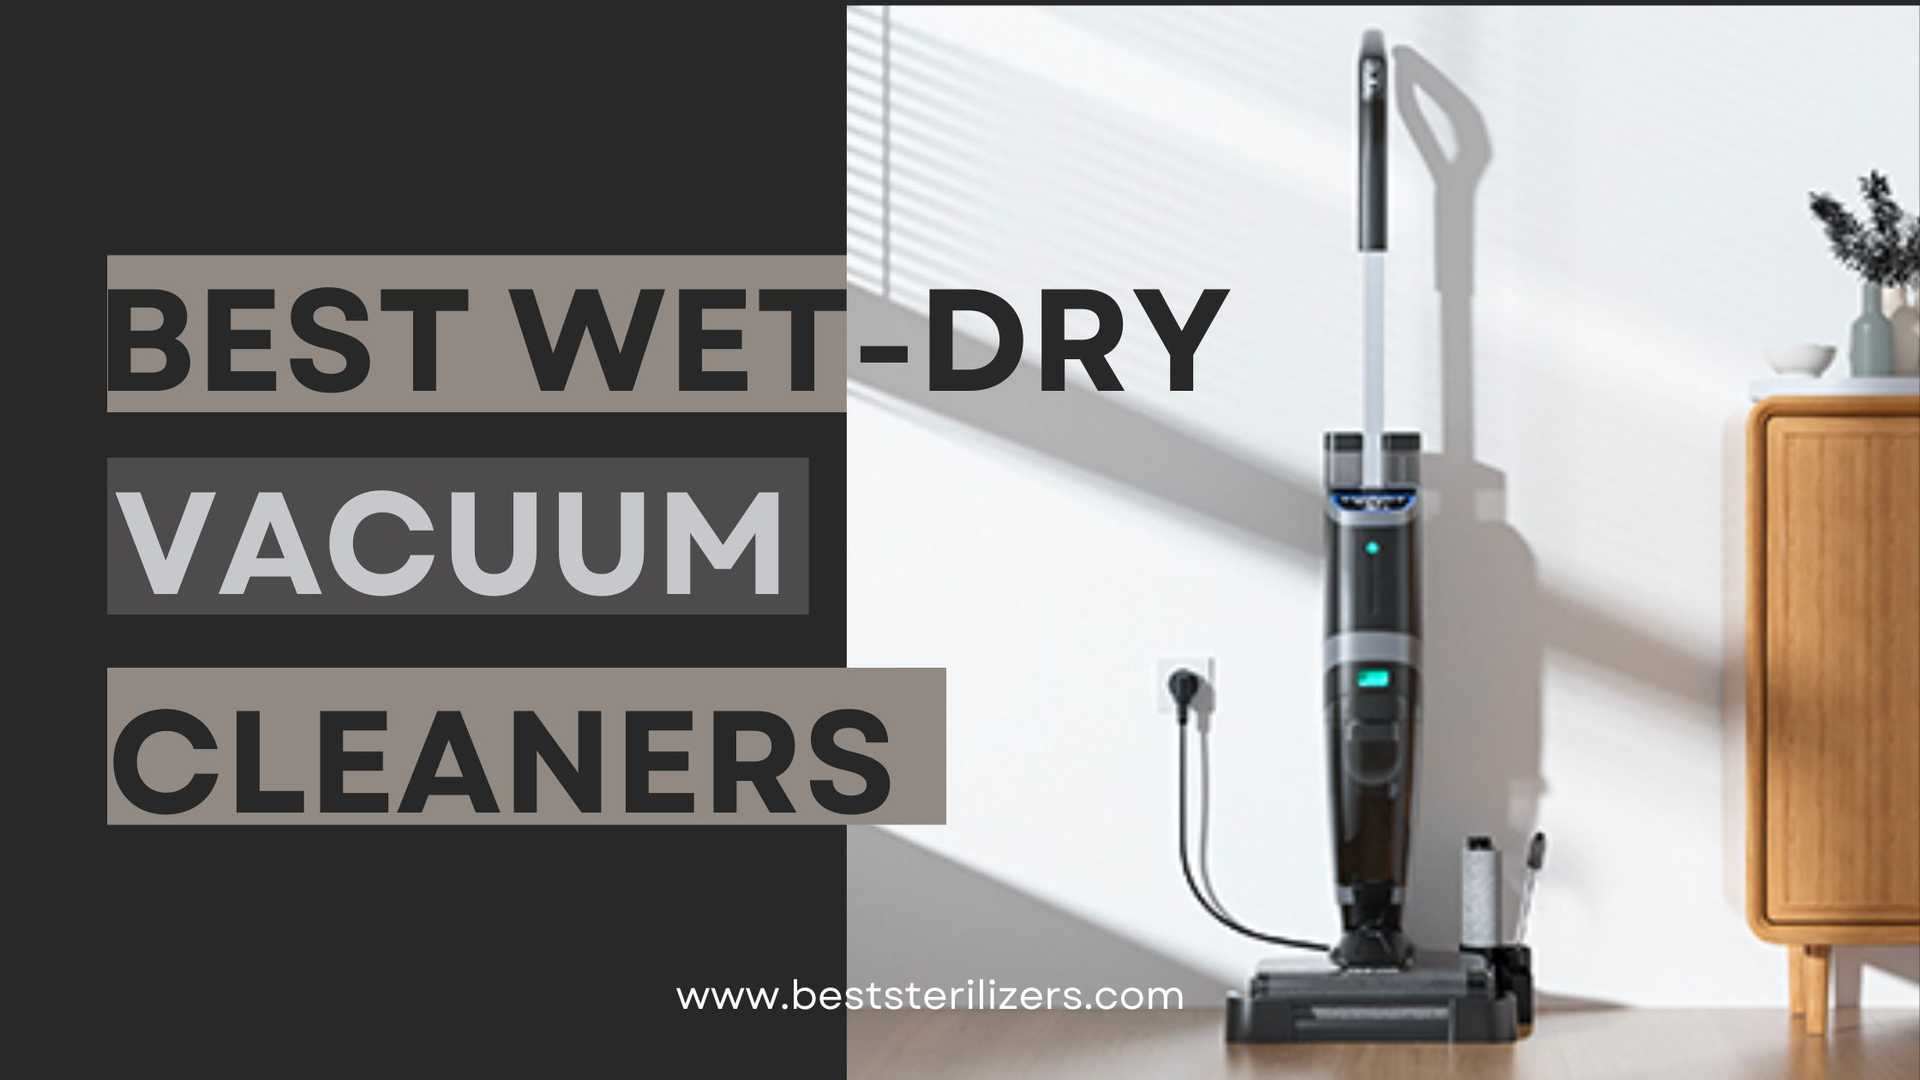 Best Wet-dry vacuum cleaners for home 2022